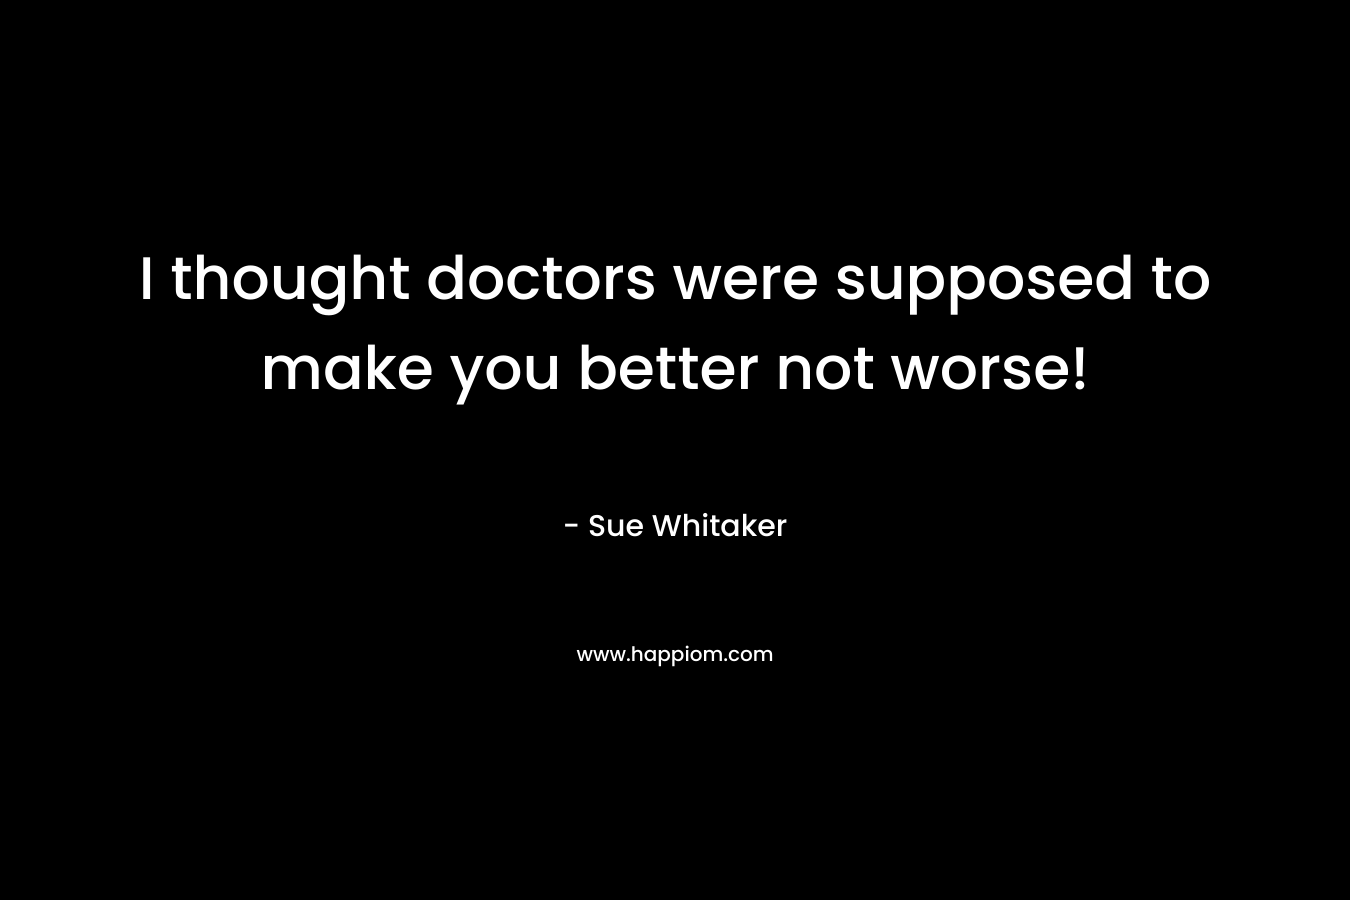 I thought doctors were supposed to make you better not worse! – Sue Whitaker